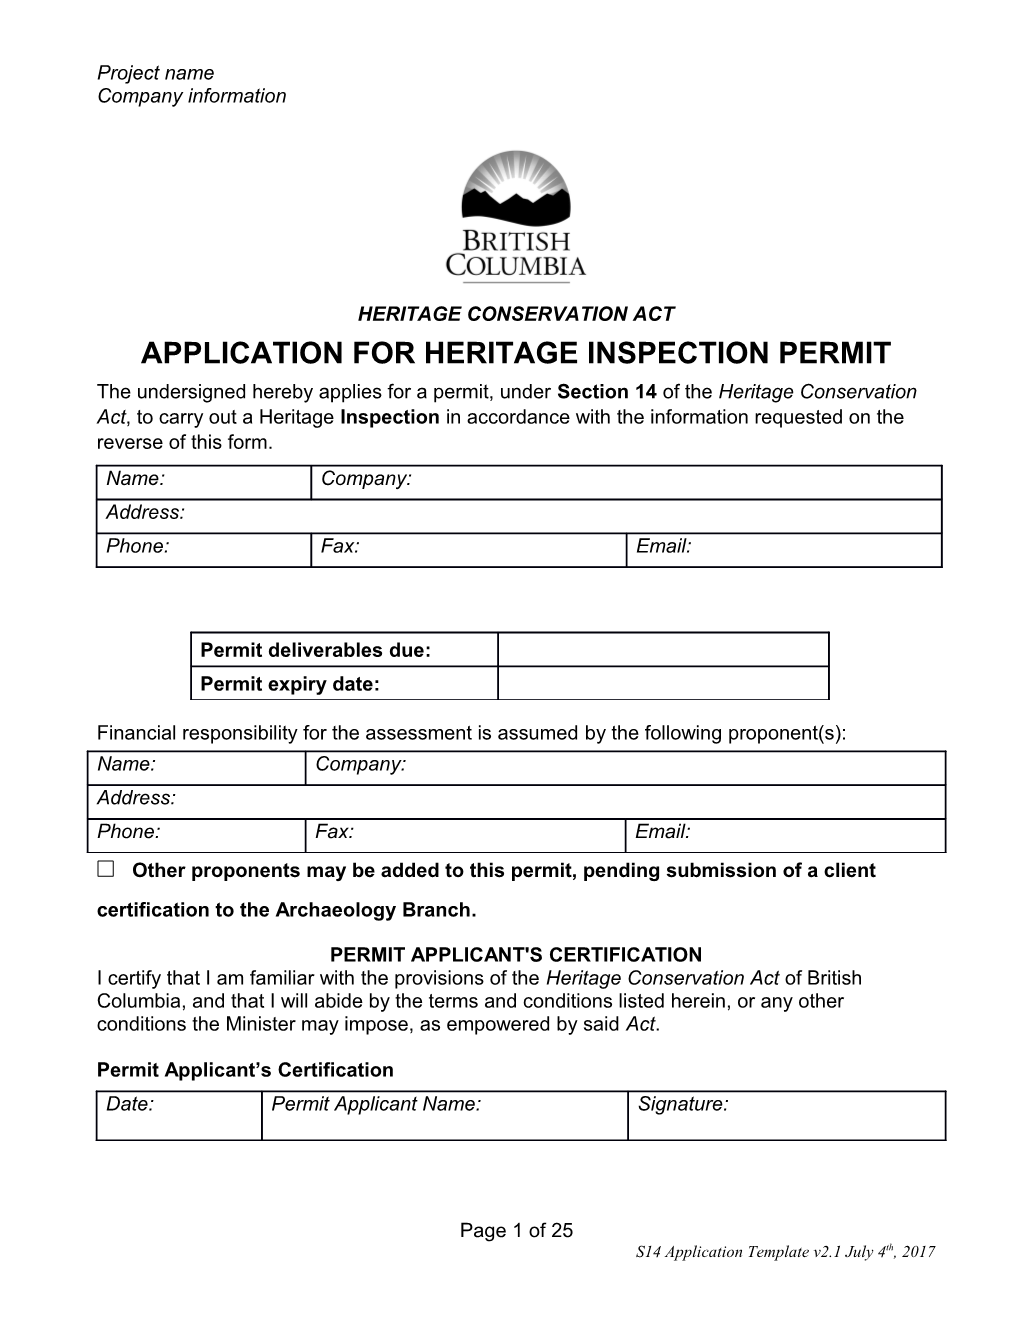 Application for Heritage Inspection Permit